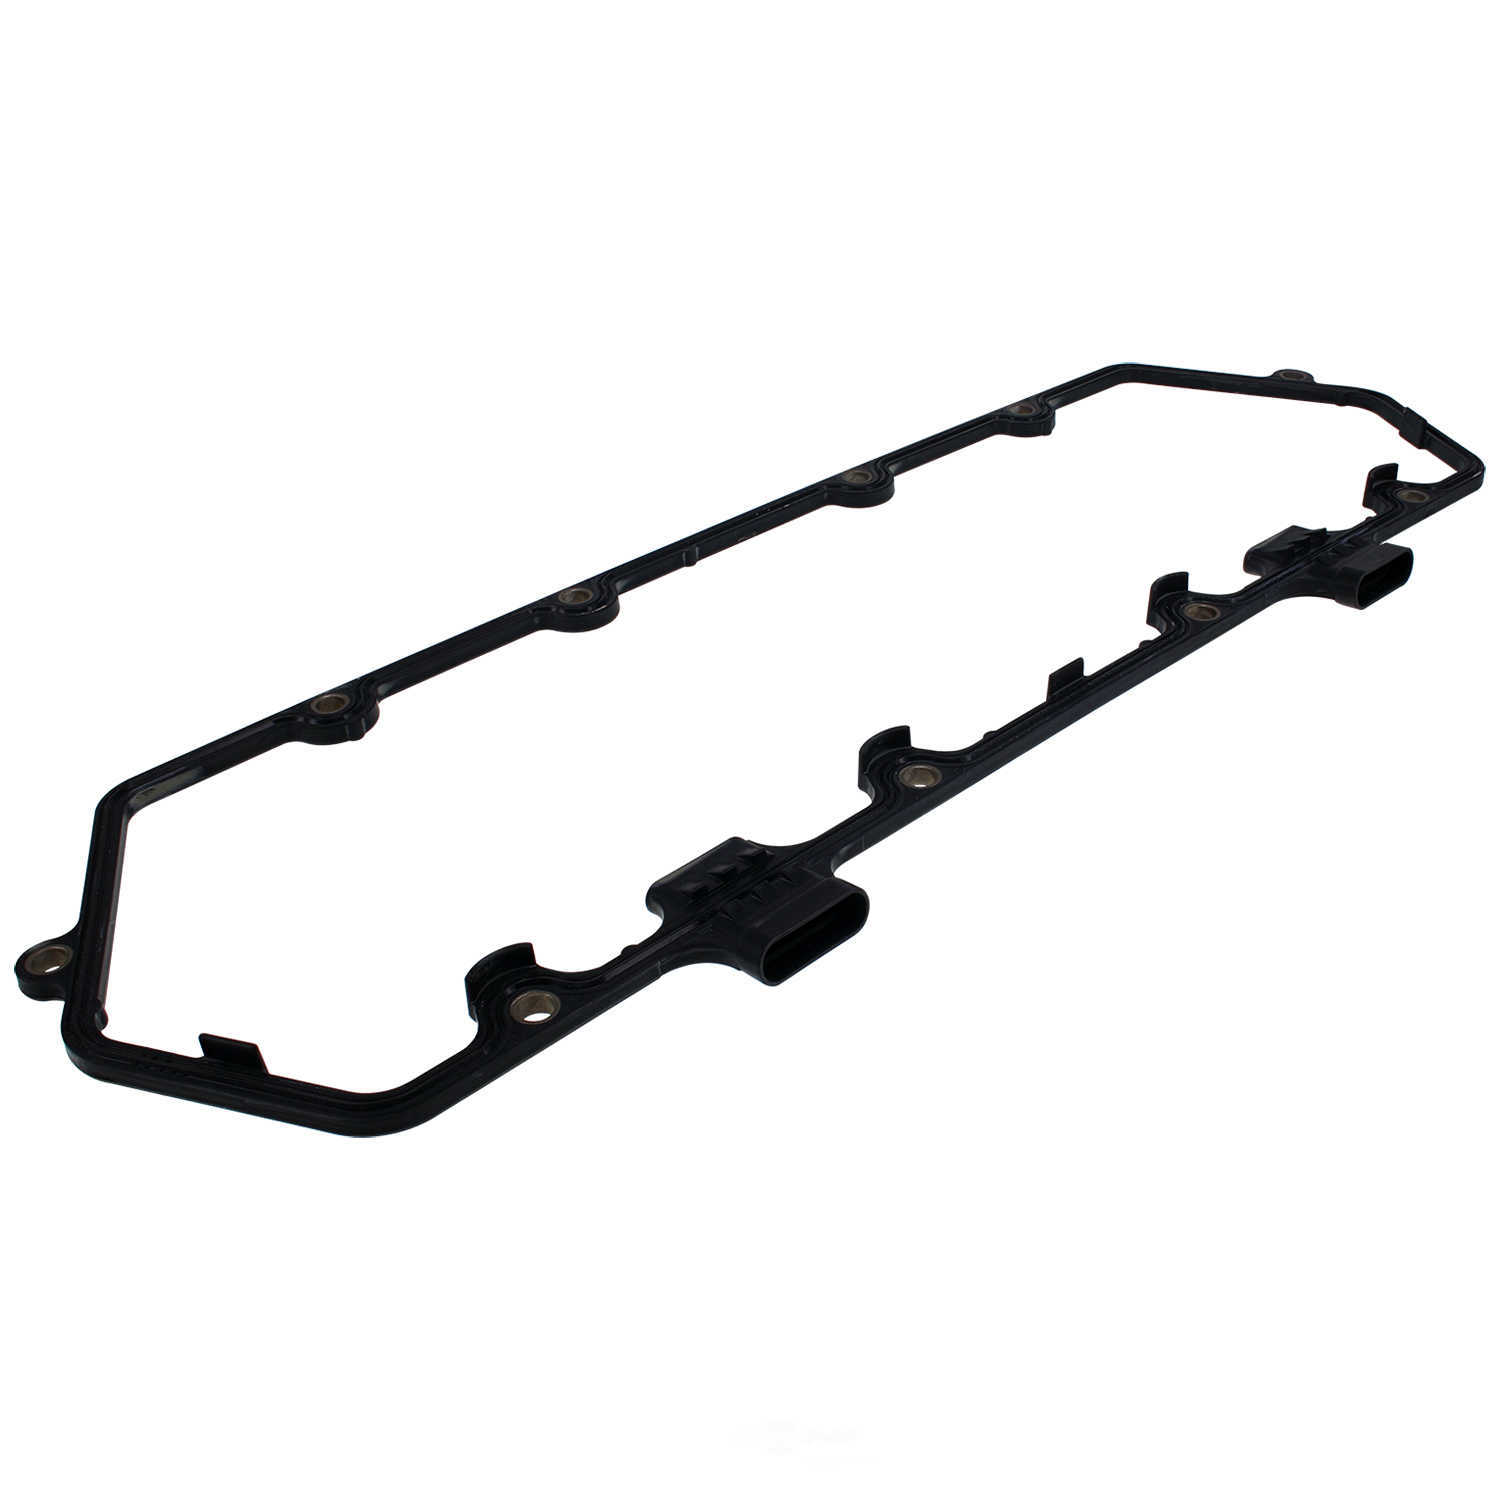 GB REMANUFACTURING INC. - Valve Cover Gasket - GBR 522-002